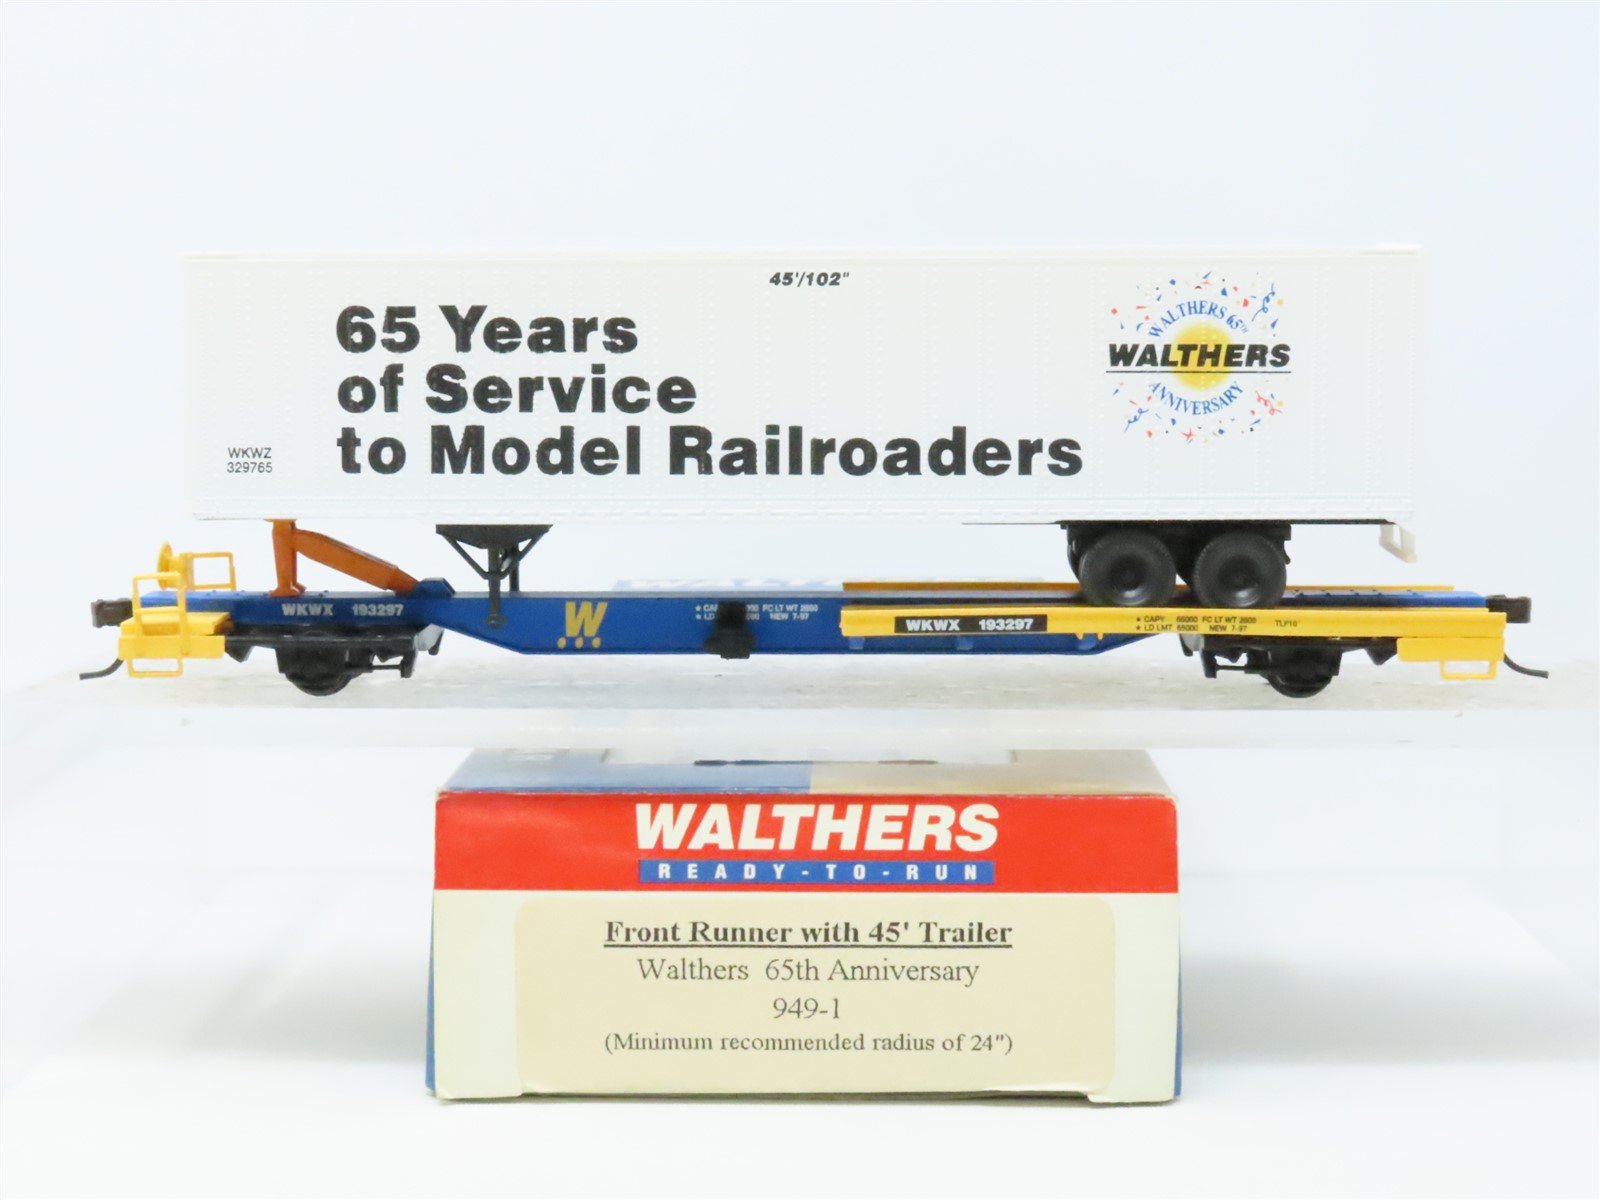 HO Walthers 949-1 WKWX 65th Anniversary Front Runner Flat Car #193297 w/Trailer